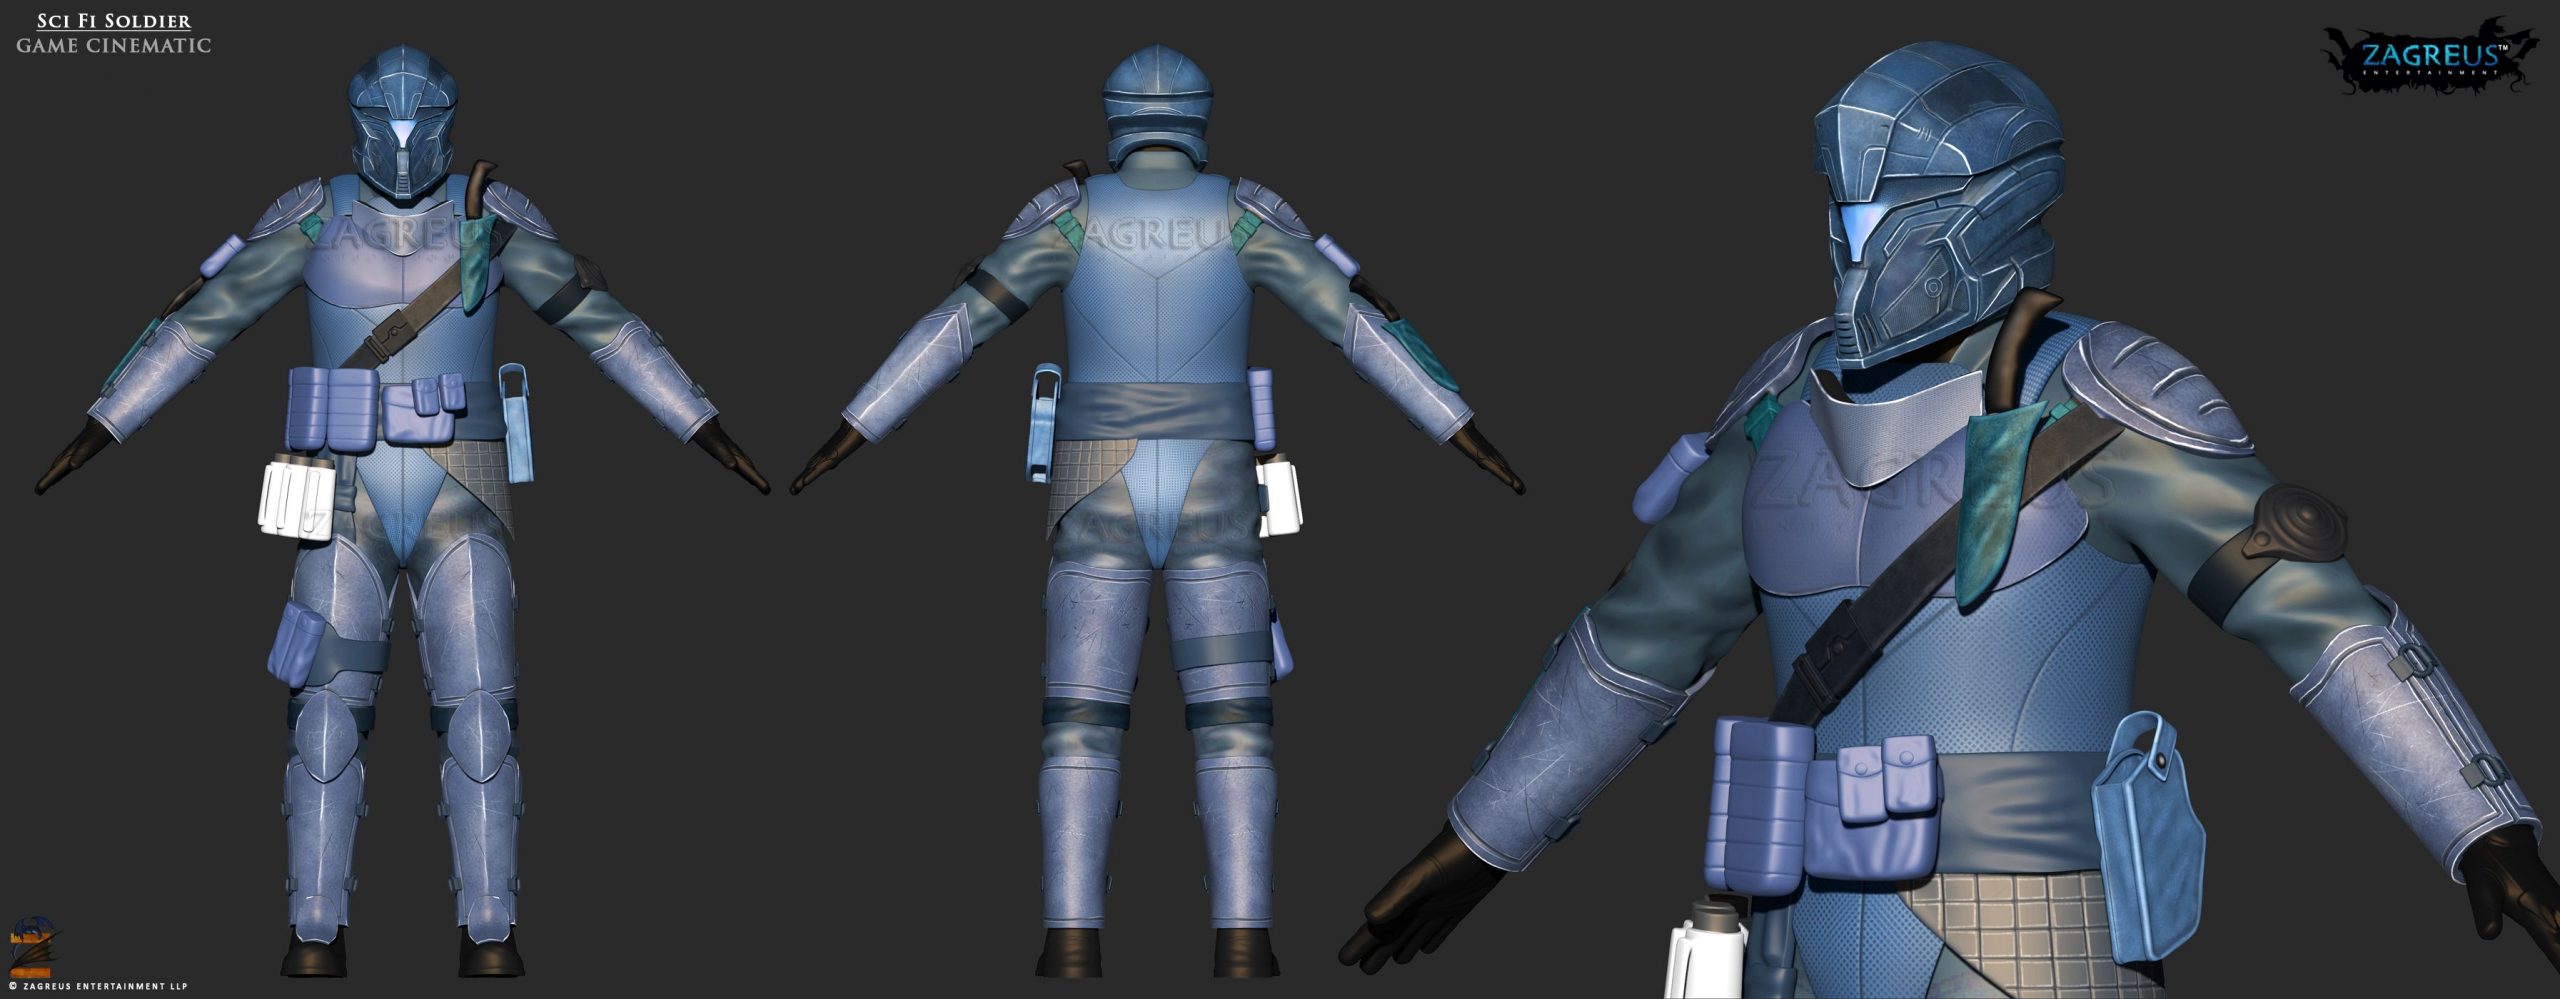 sci-fi-soldier_cinematic_ze-scaled.jpg